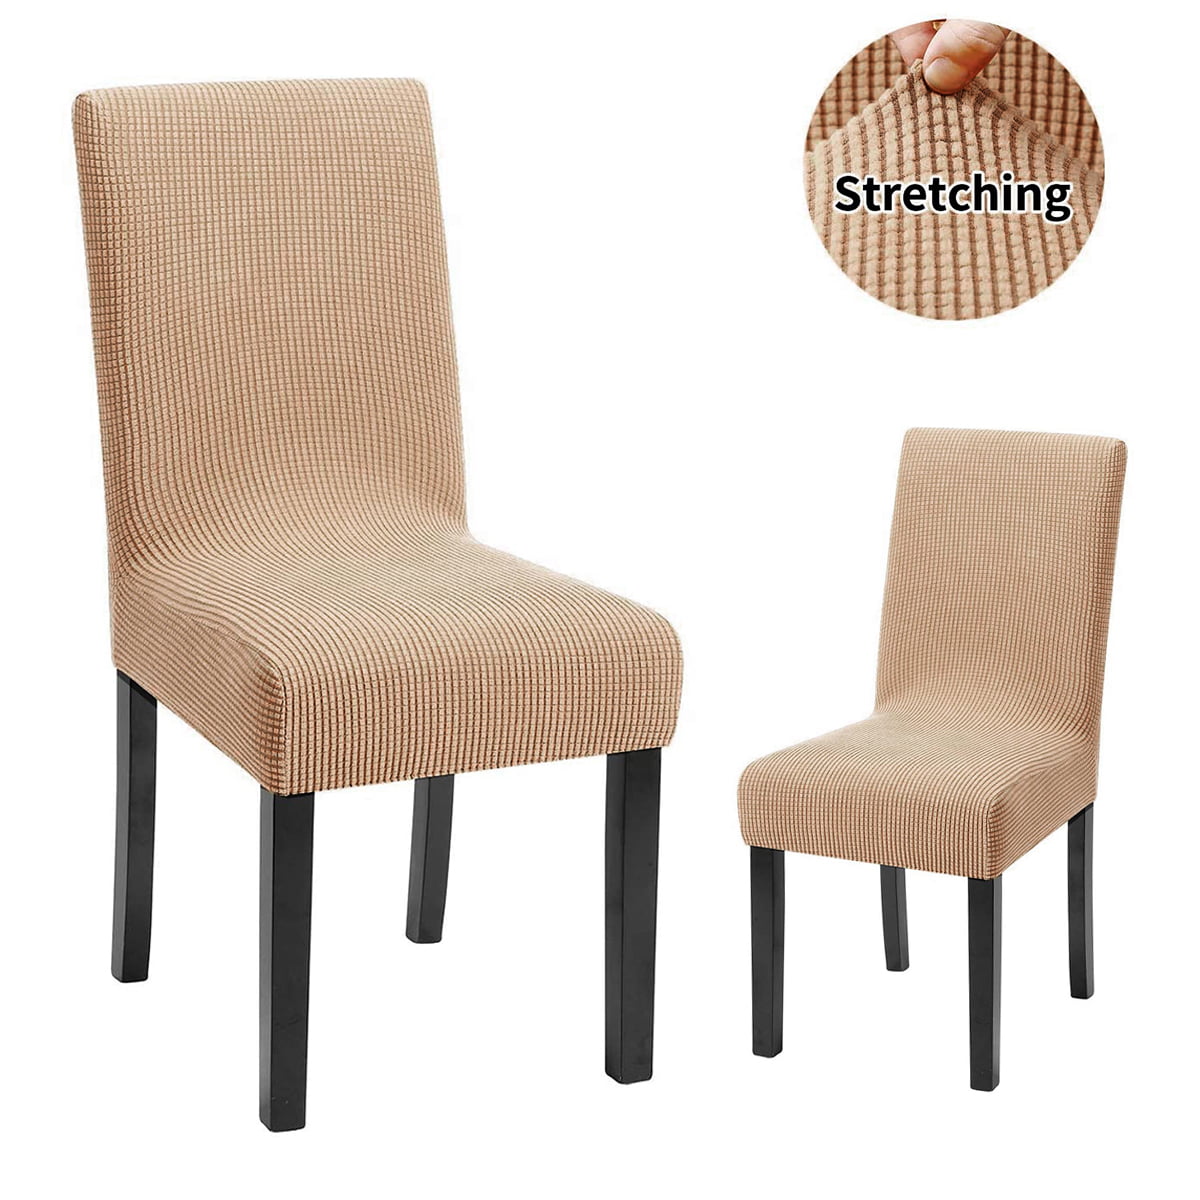 Details about   Dining Chair Cover Spandex Elastic Chair Slipcover Stretch Seat Covers For Party 